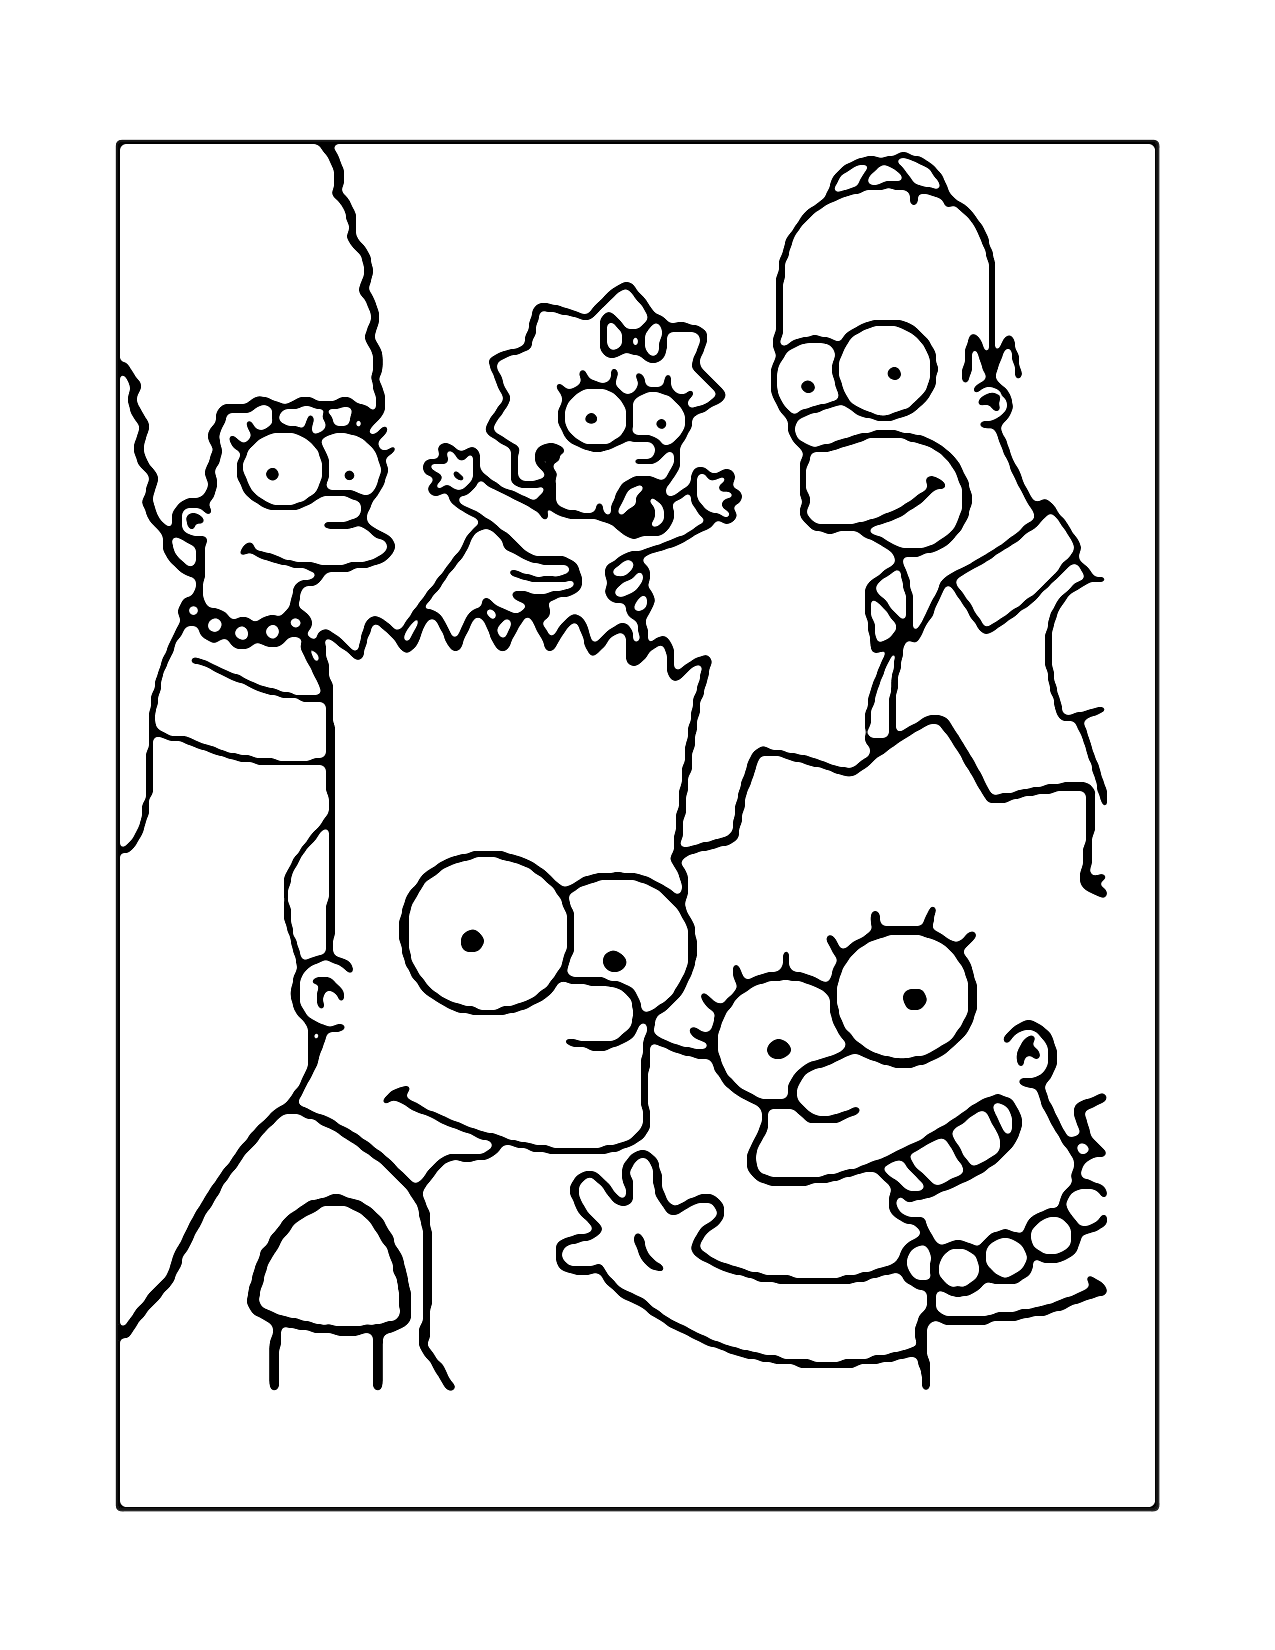 The Simpsons Characters Coloring Page